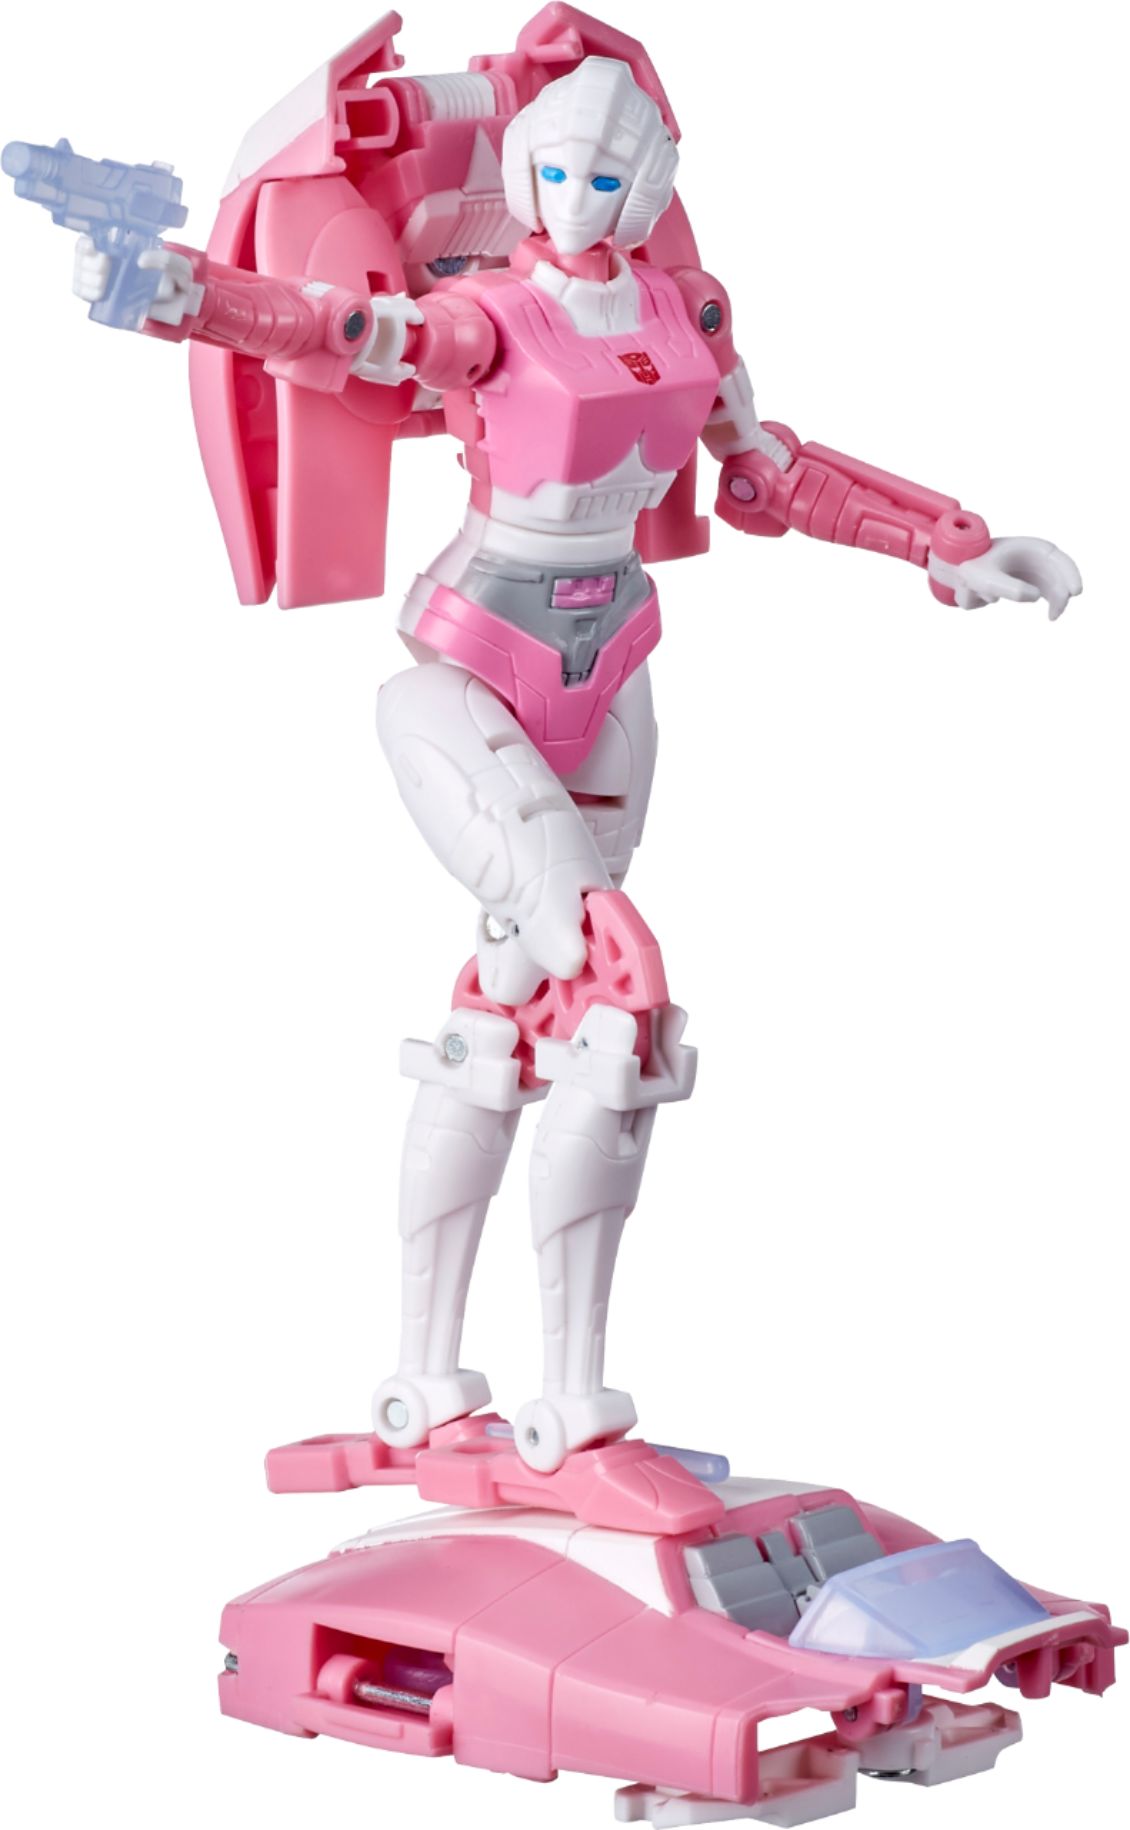 Transformers - Generations War for Cybertron Deluxe WFC-E17 Arcee